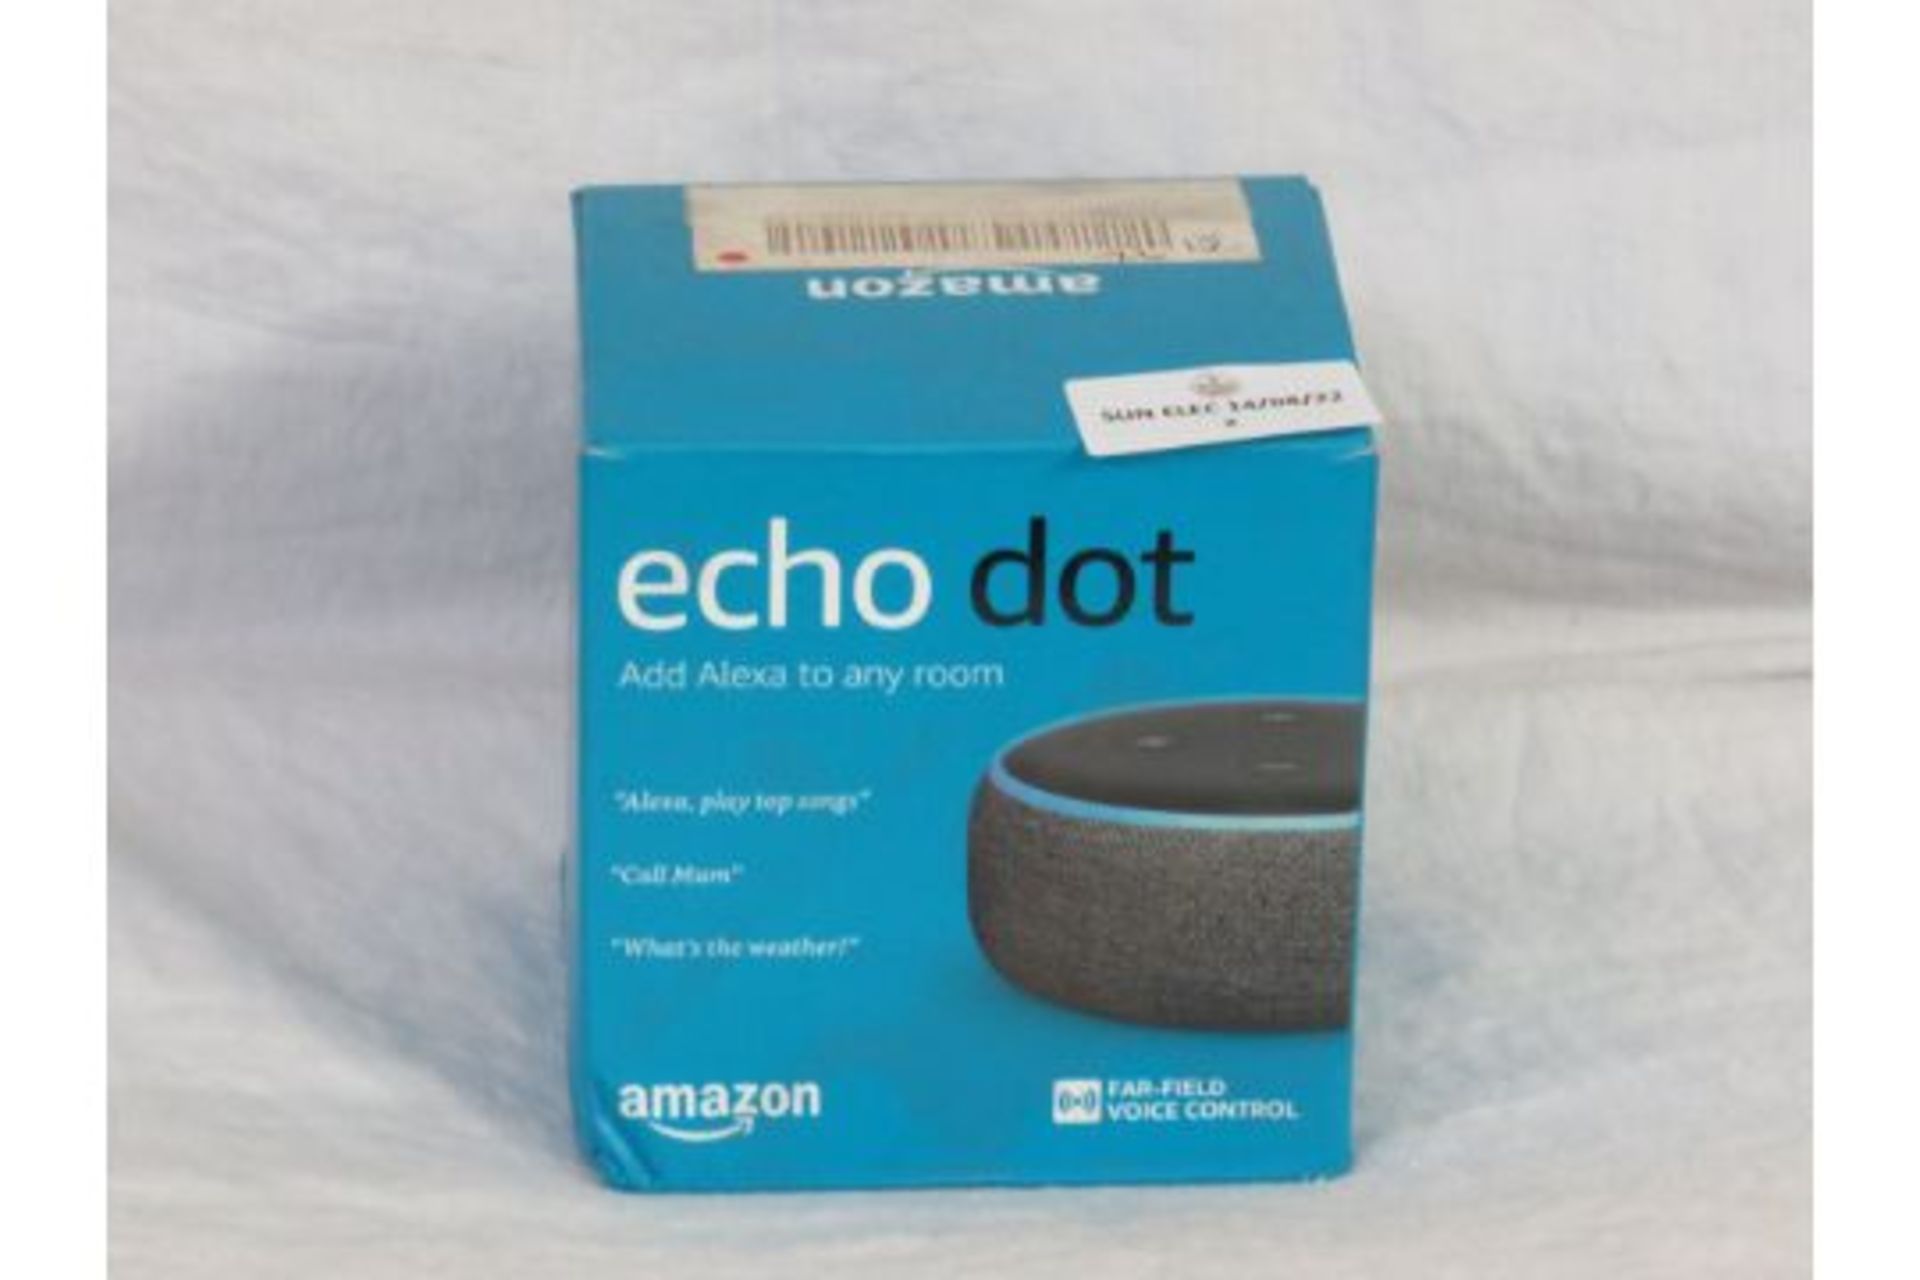 Amazon Echo Dot, unchecked and boxed.